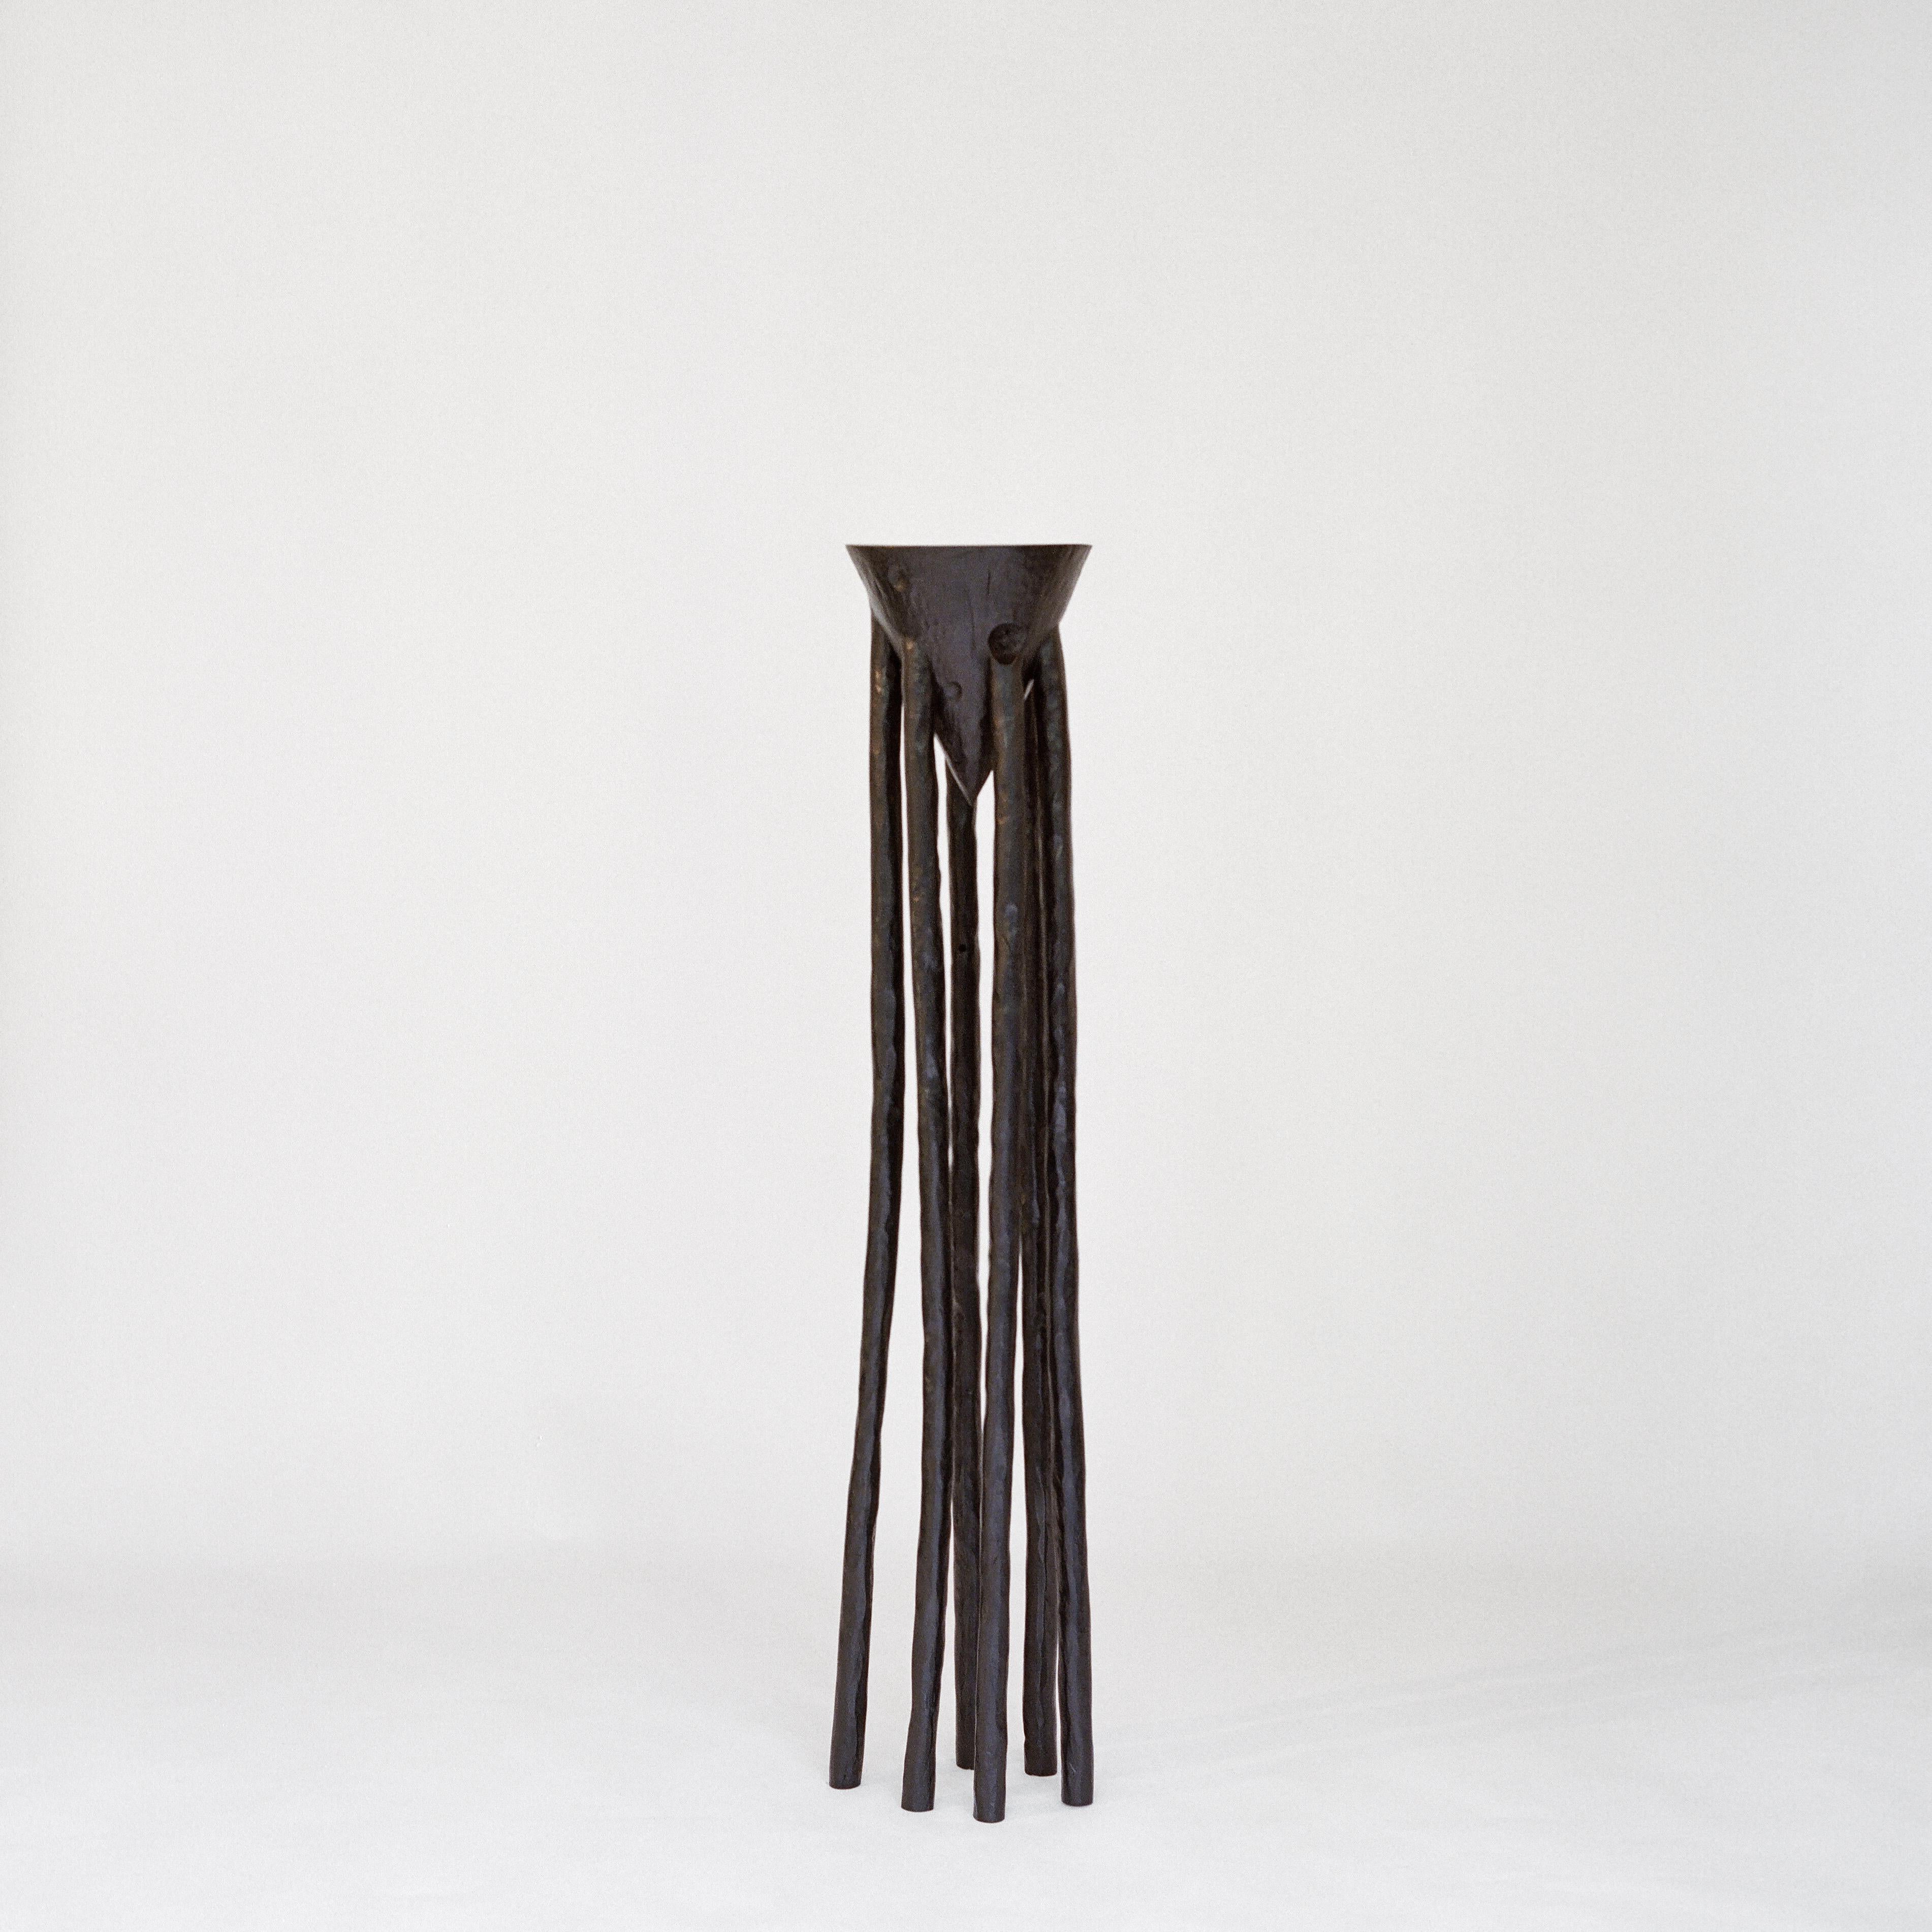 Handmade High Table by Henry D'ath
Dimensions: D 25 x H 135 cm
Materials: Wood, calligraphy ink.

Piece is handmade by artist.

Carved by hand from a single wooden log over many months, this series of tall tables is shaped with a consideration of